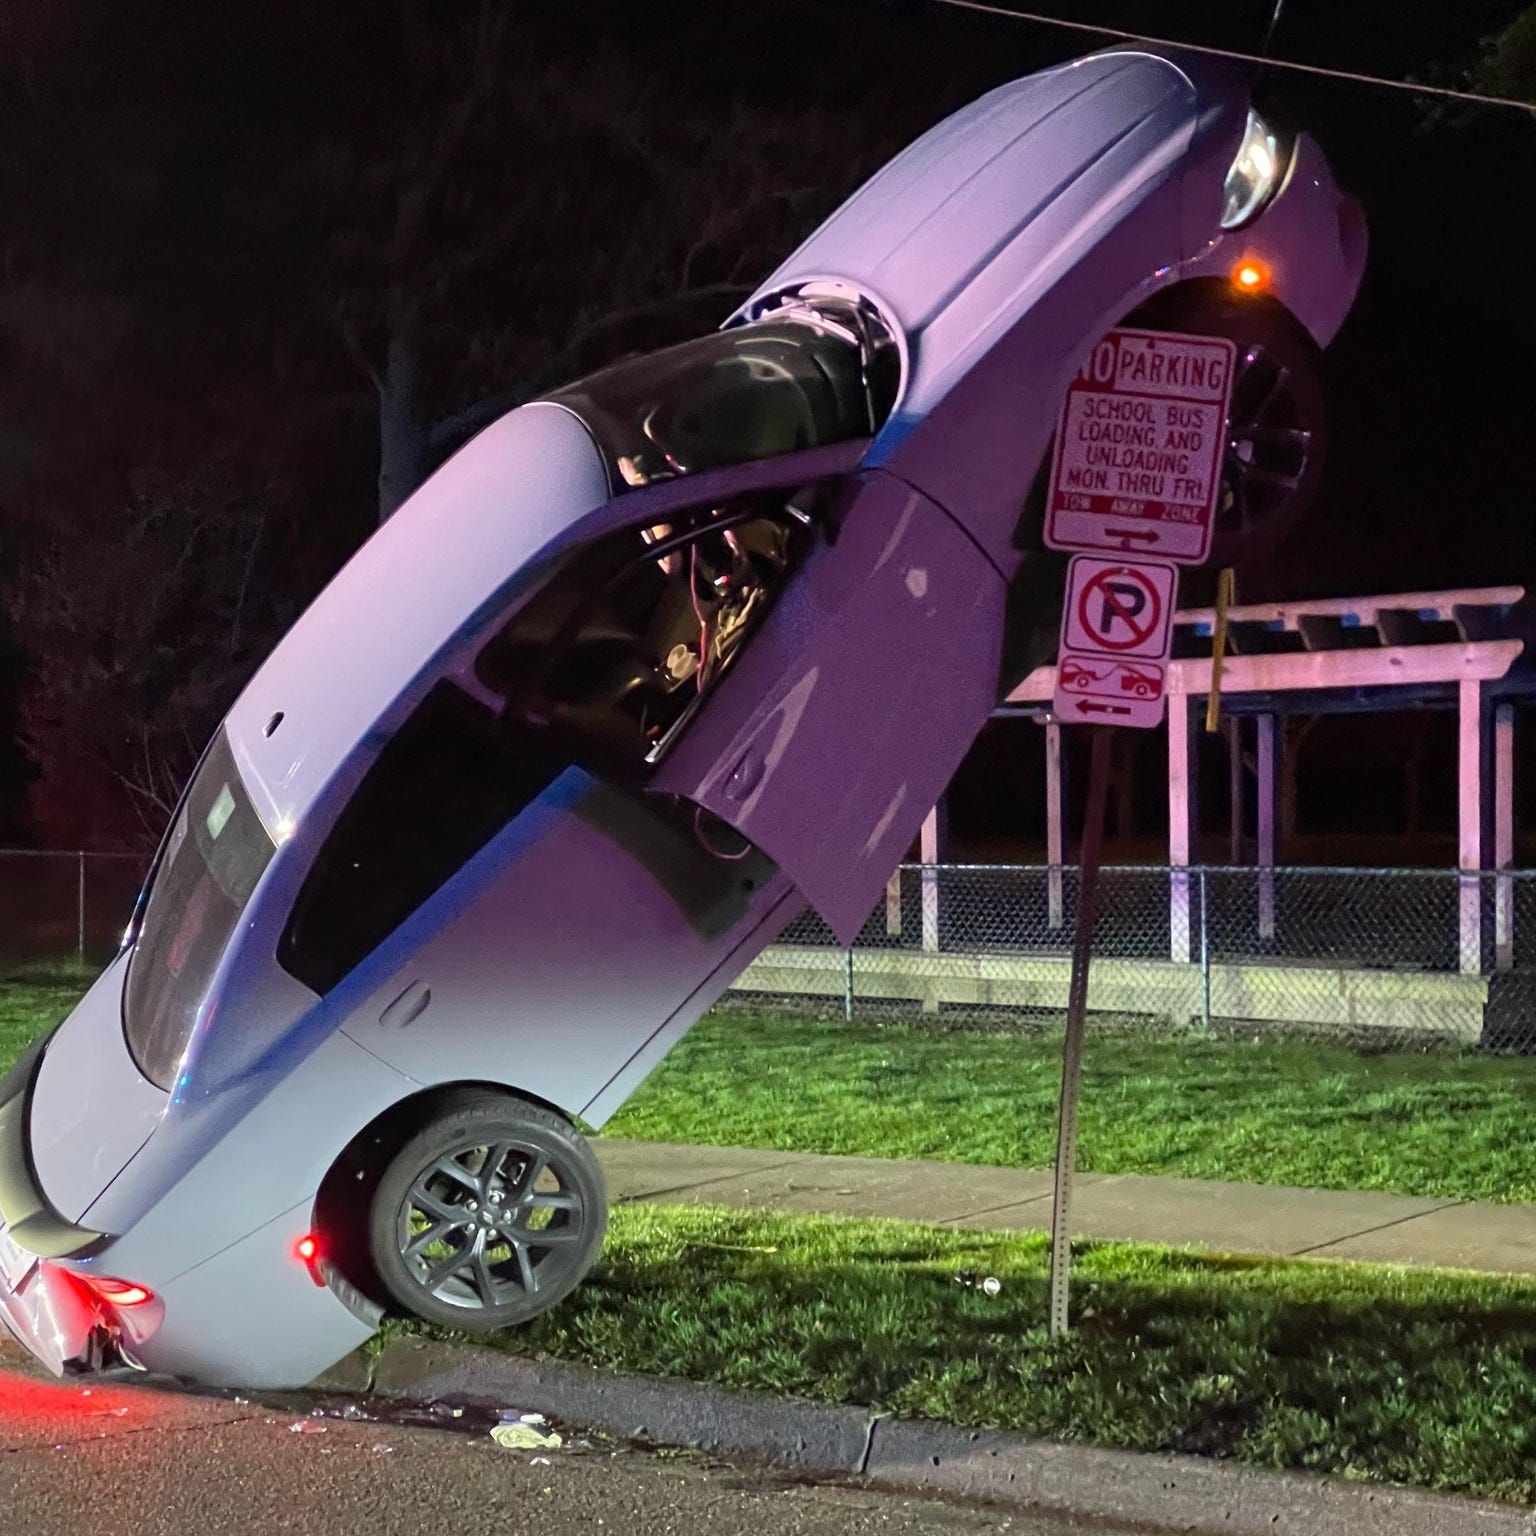 Ann Arbor police said officers found a car resting vertically early Friday when they responded to a report of a single-vehicle crash.